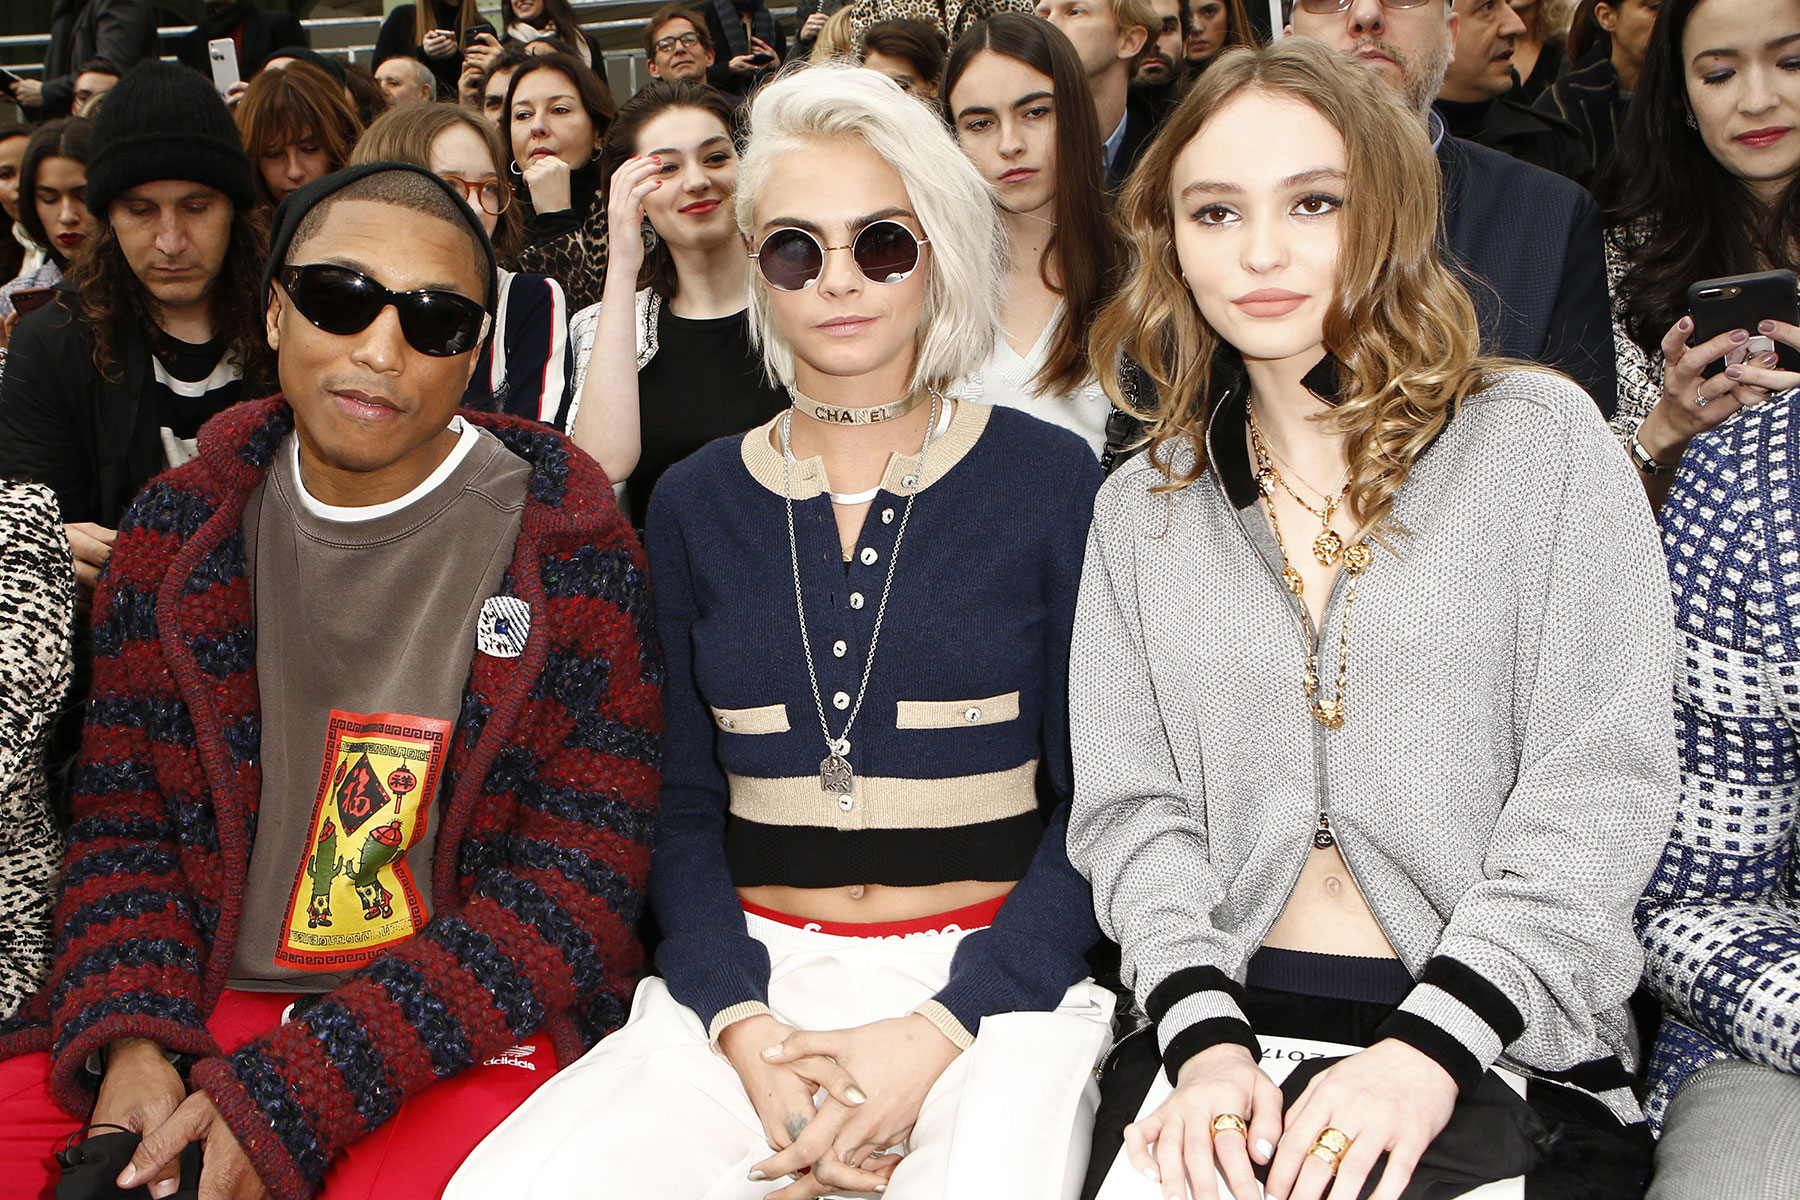 SPOTTED: Cara Delevingne in Men’s Supreme Boxers and Chanel – PAUSE ...